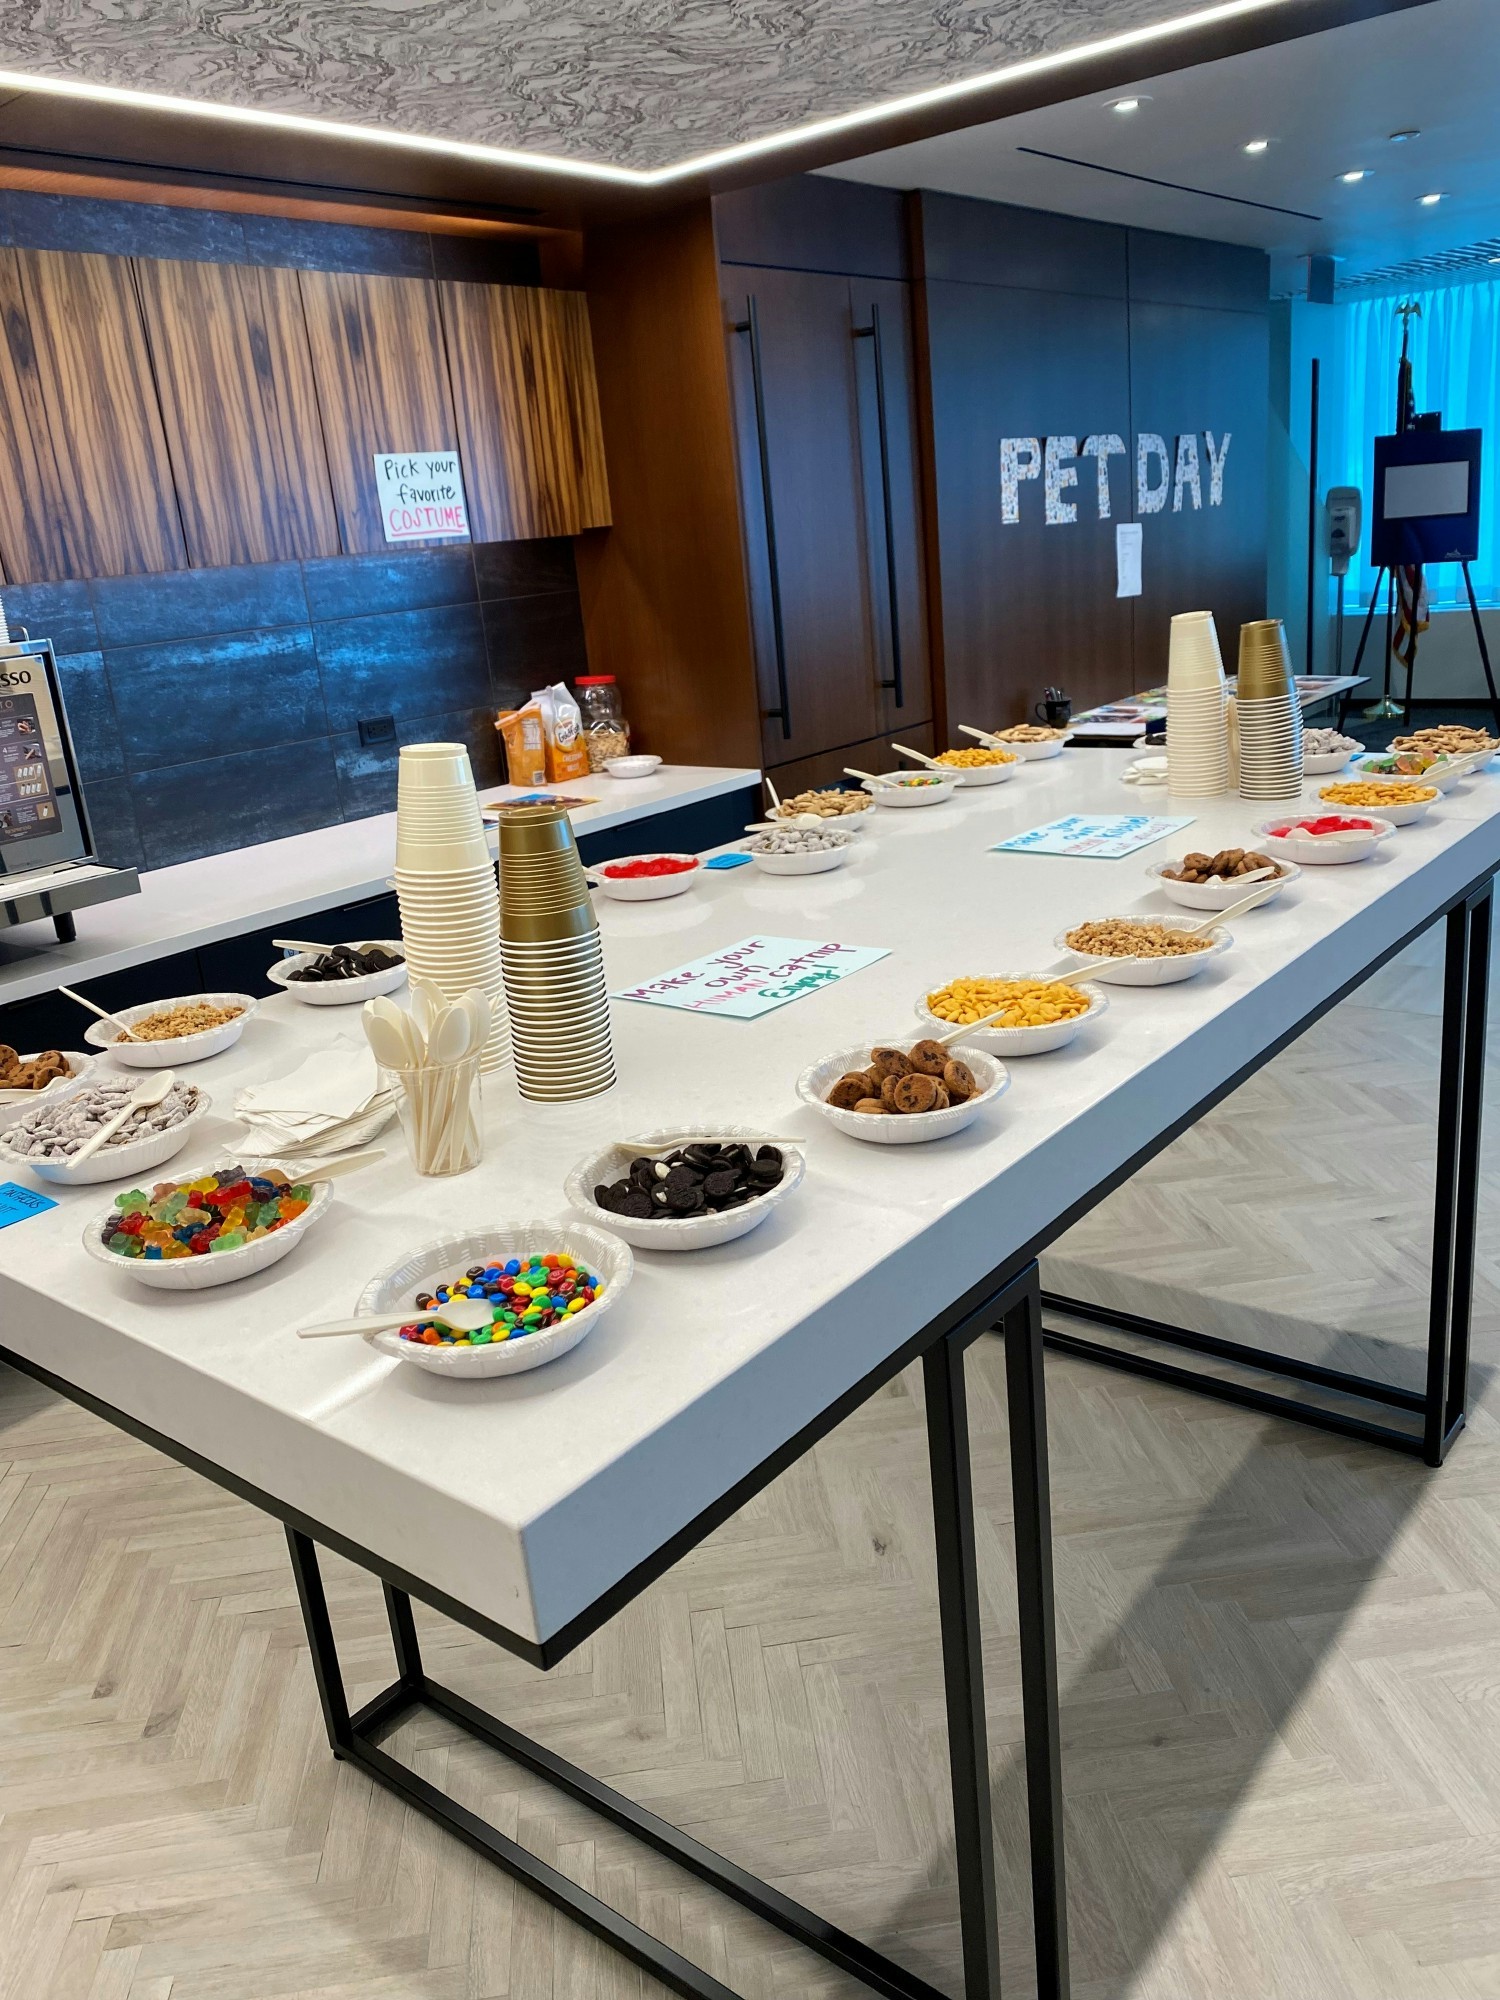 AGA staff love their pets. In April, staff celebrated National Pet Day with a build-your-own puppy chow bar.